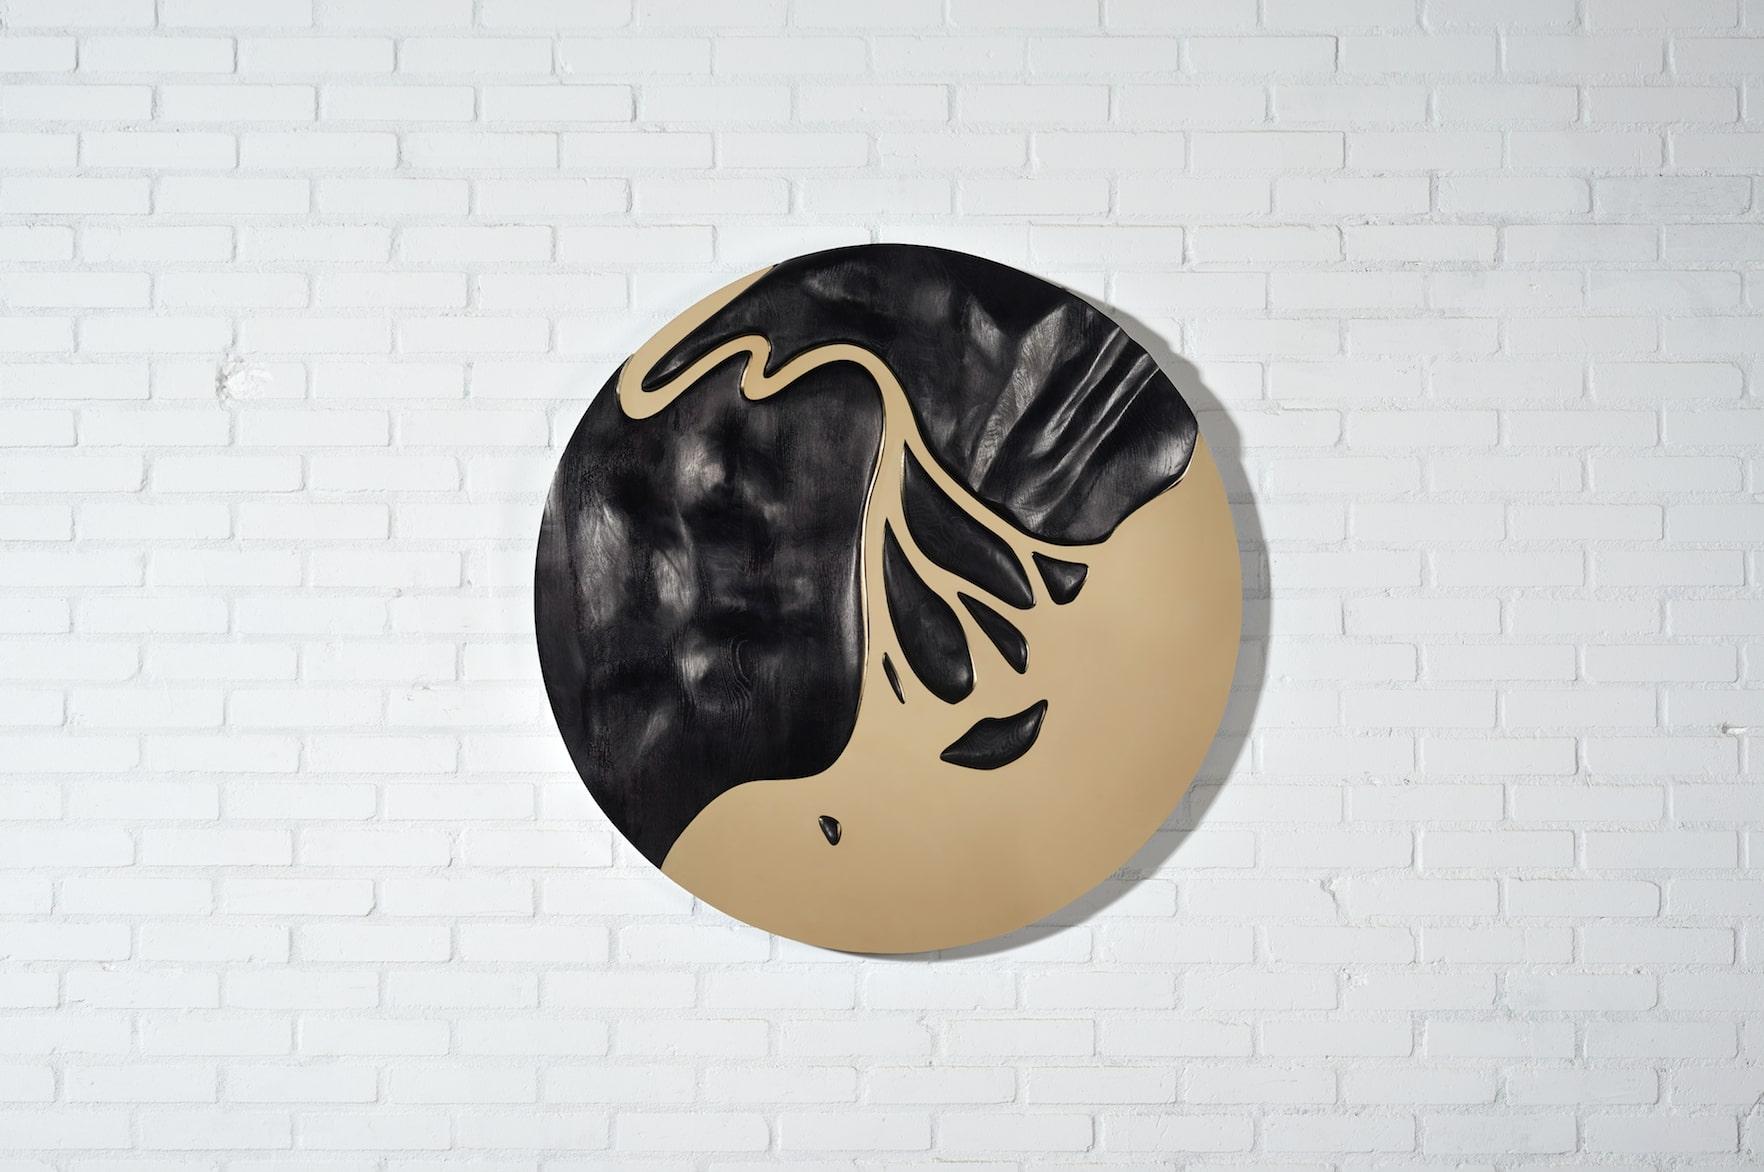 Delta mirror Herodotus by Onno Adriaanse
Hand-sculpted, 2022
Edition: limited edition of 8.
Dimensions: Ø 100 cm x 8 cm
Materials: oak wood and polished brass.

Collection of wall objects / mirrors made of hand sculpted wood and polished